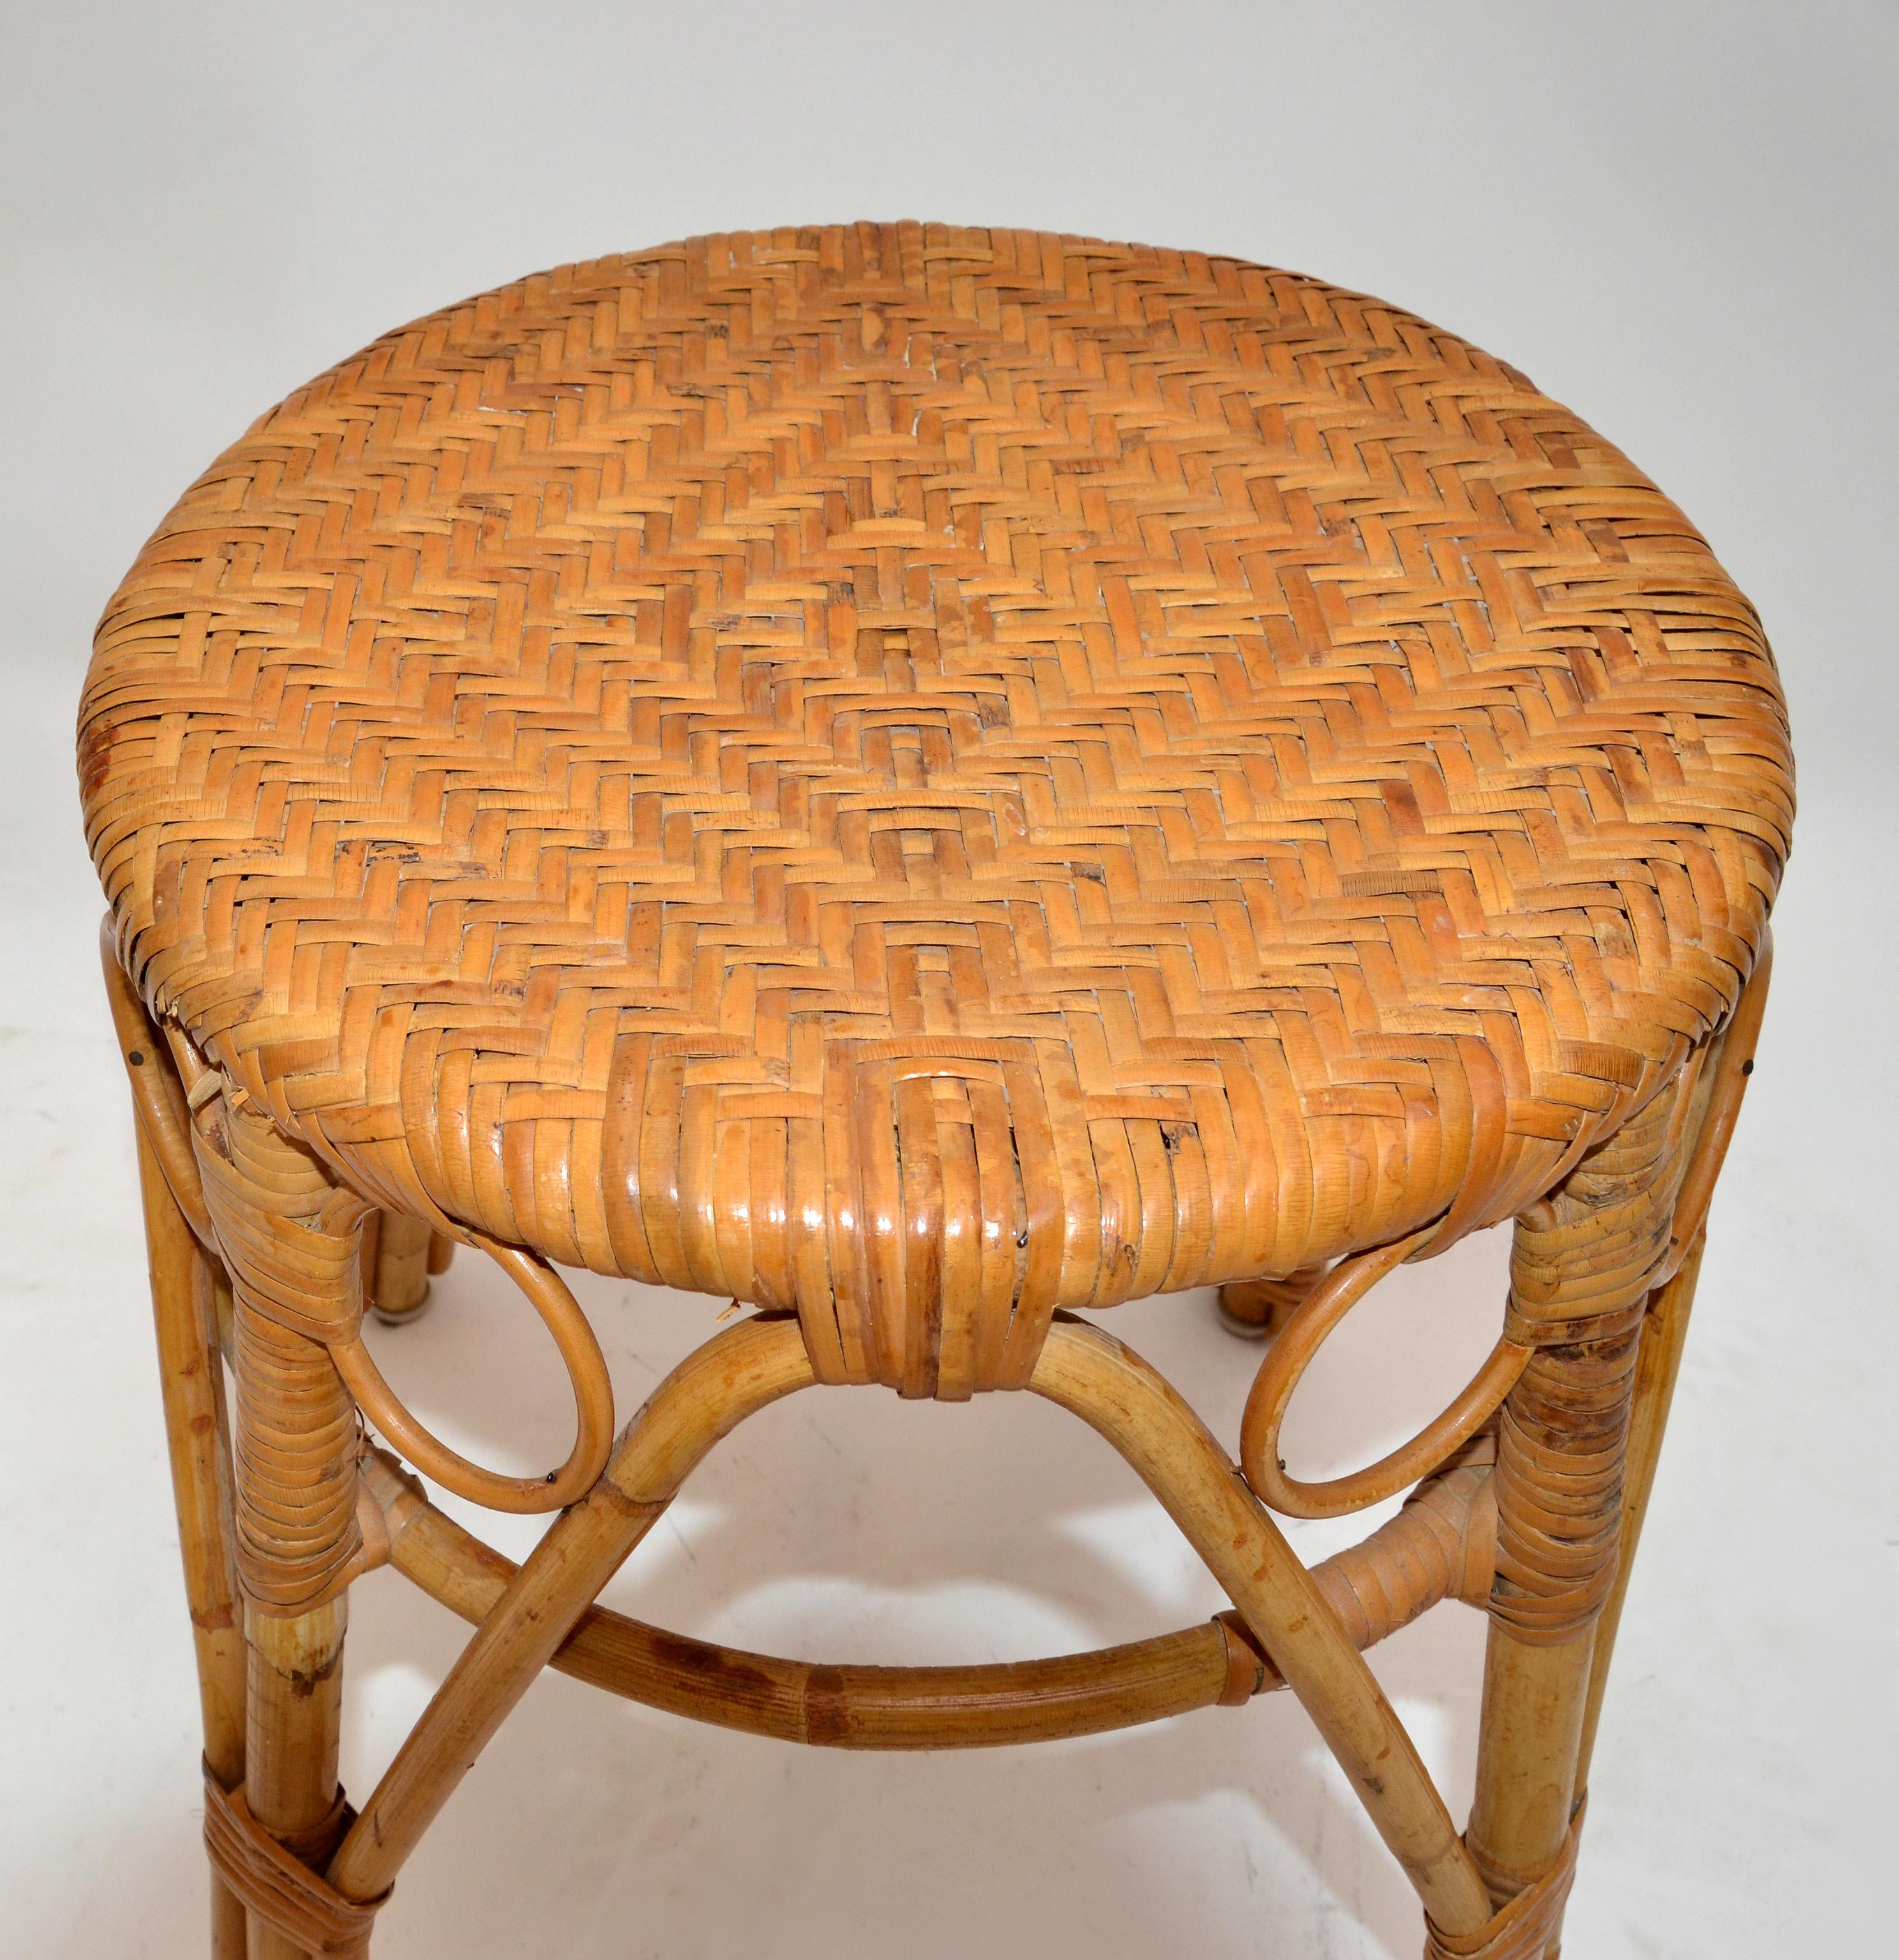 Hand-Woven Vintage Bohemian Chic Woven Blonde Bamboo and Rattan Stool For Sale